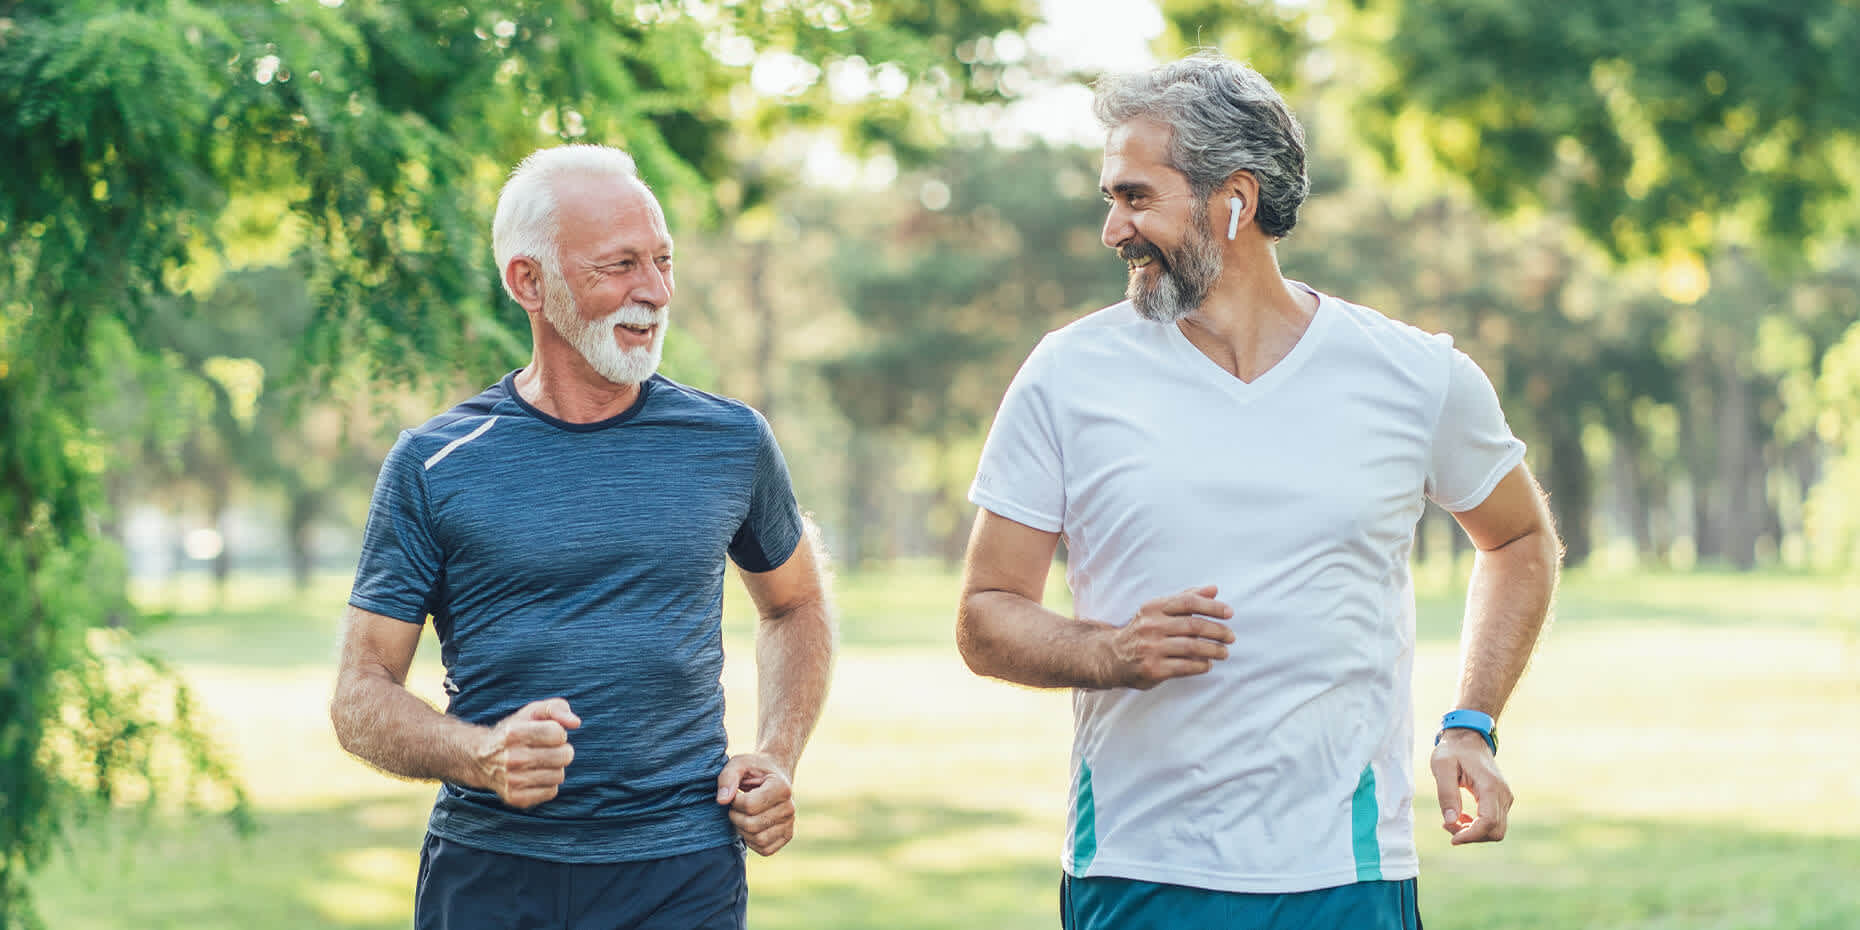 Two men jogging with each other talking about vitamin B12 for older adults